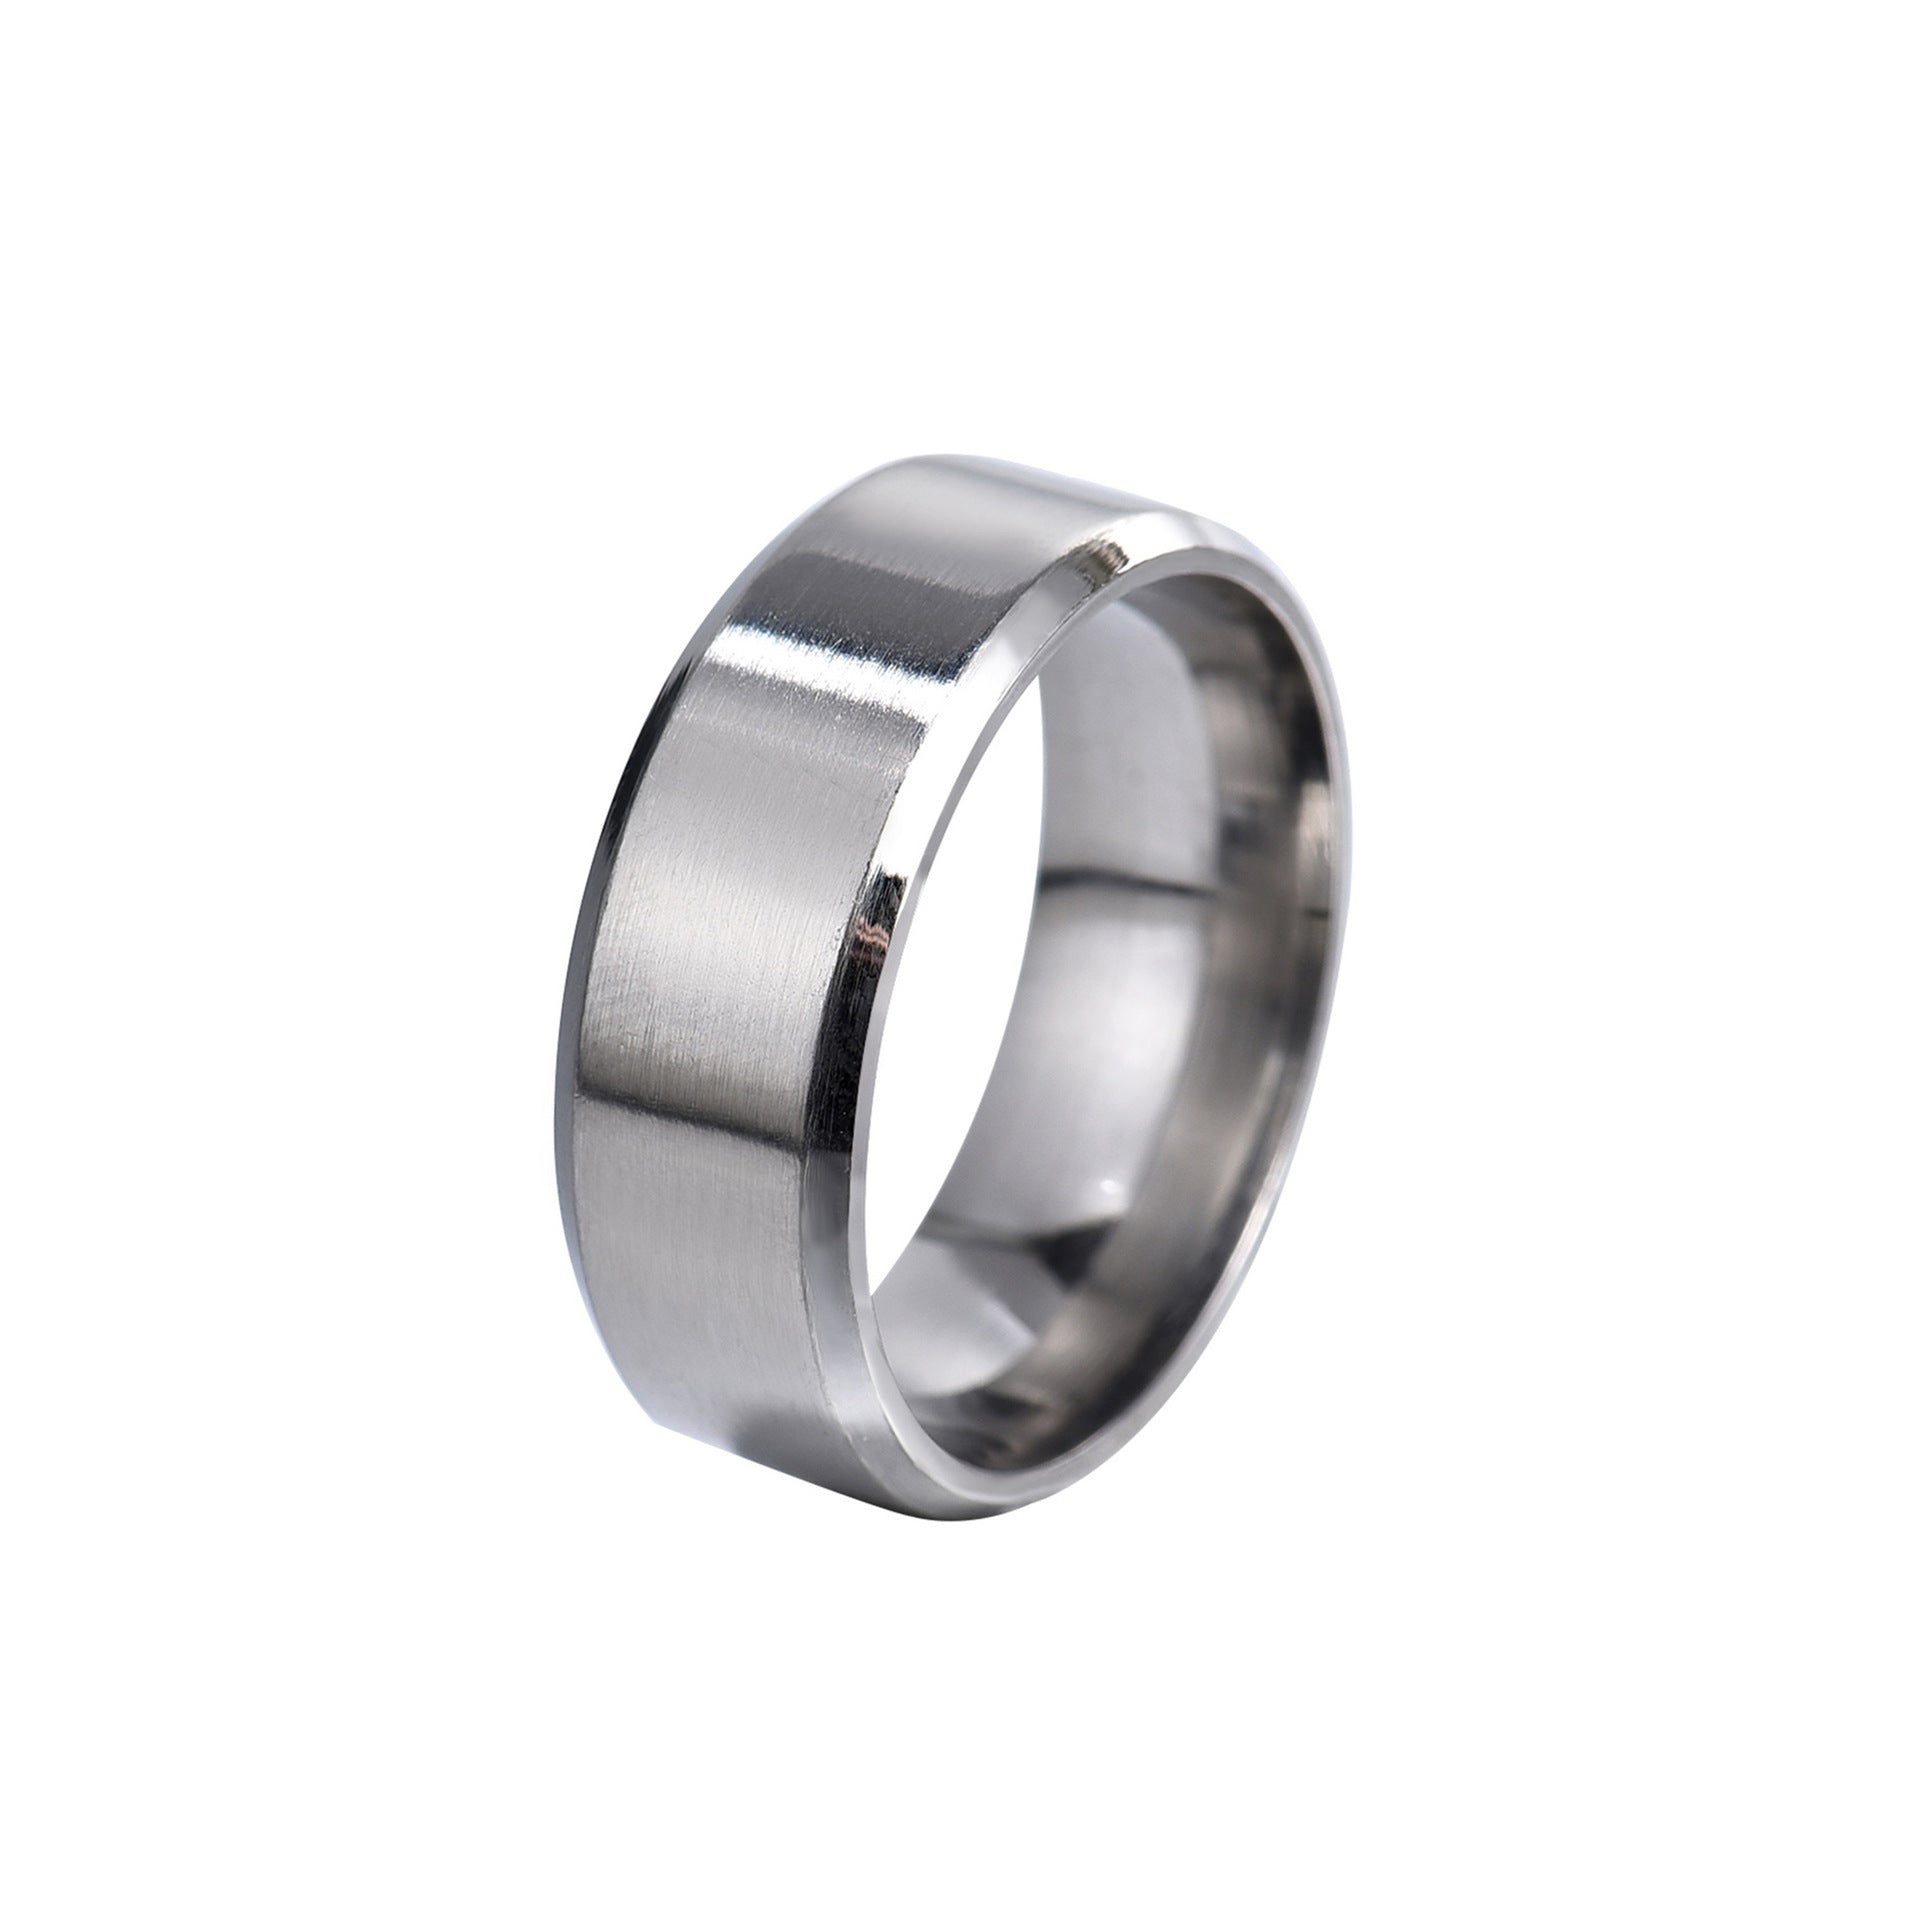 Silver Colored 316L Quality Steel Ring Wedding Ring (21 Size)